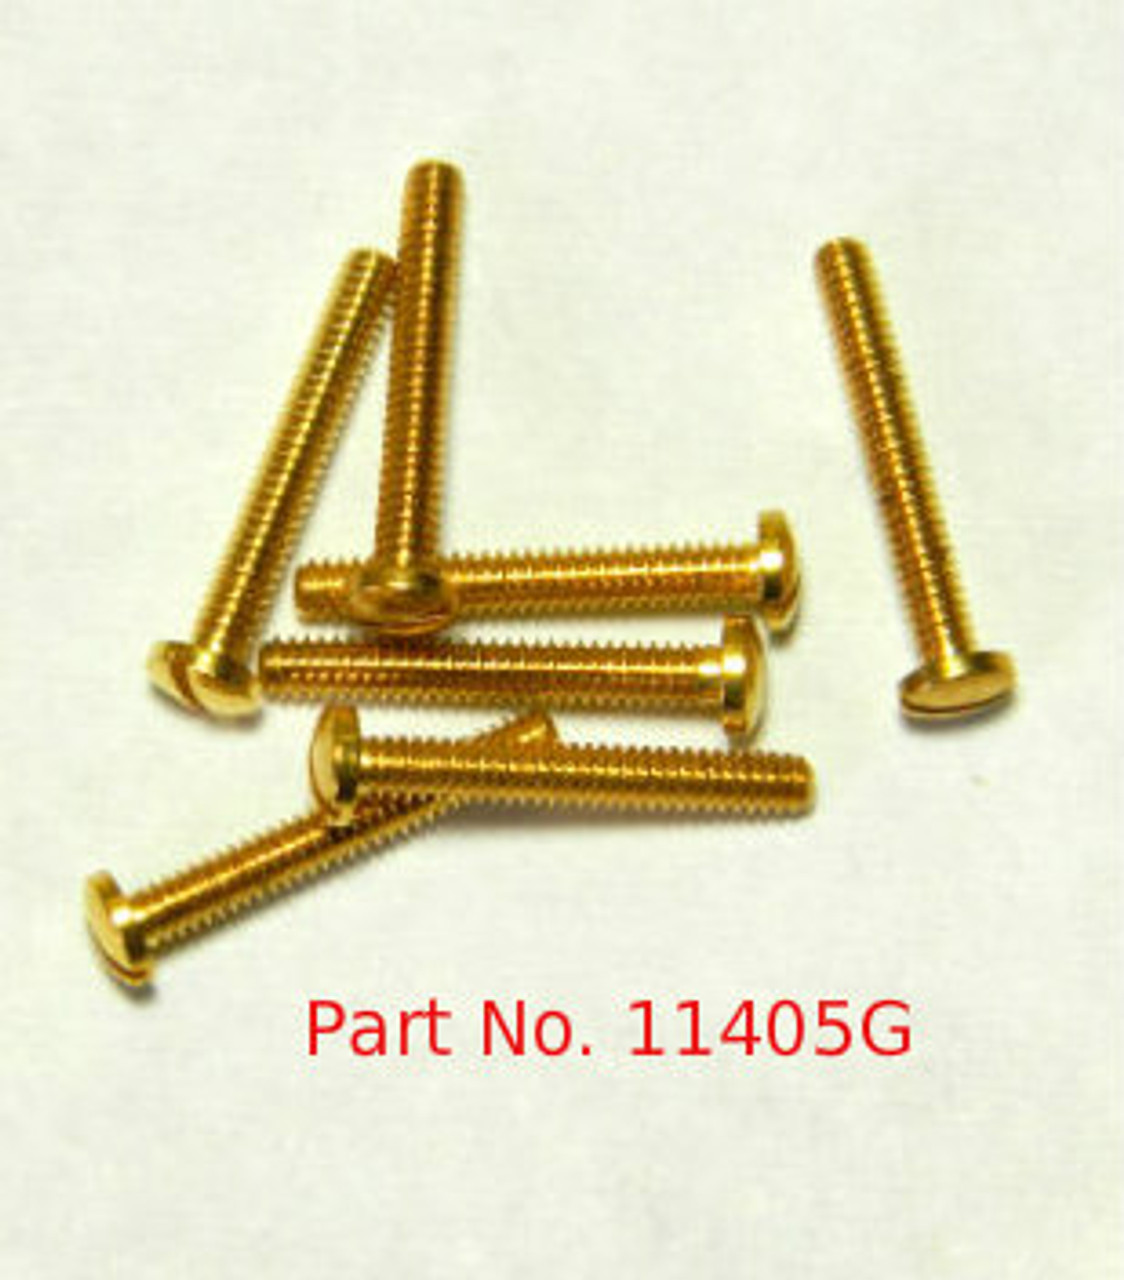 Machine Screw, Pan Head, Special,  Thread M1.4 (1.40UNM), Pitch .30mm, Head diameter 2.5mm, Threaded Length 9.7mm (3/8"), Overall Length 10.5mm,  Material Nickel Silver; a copper alloy superior to brass. Finish Color "Gold",   Price is for 100 count package with bulk pricing available.